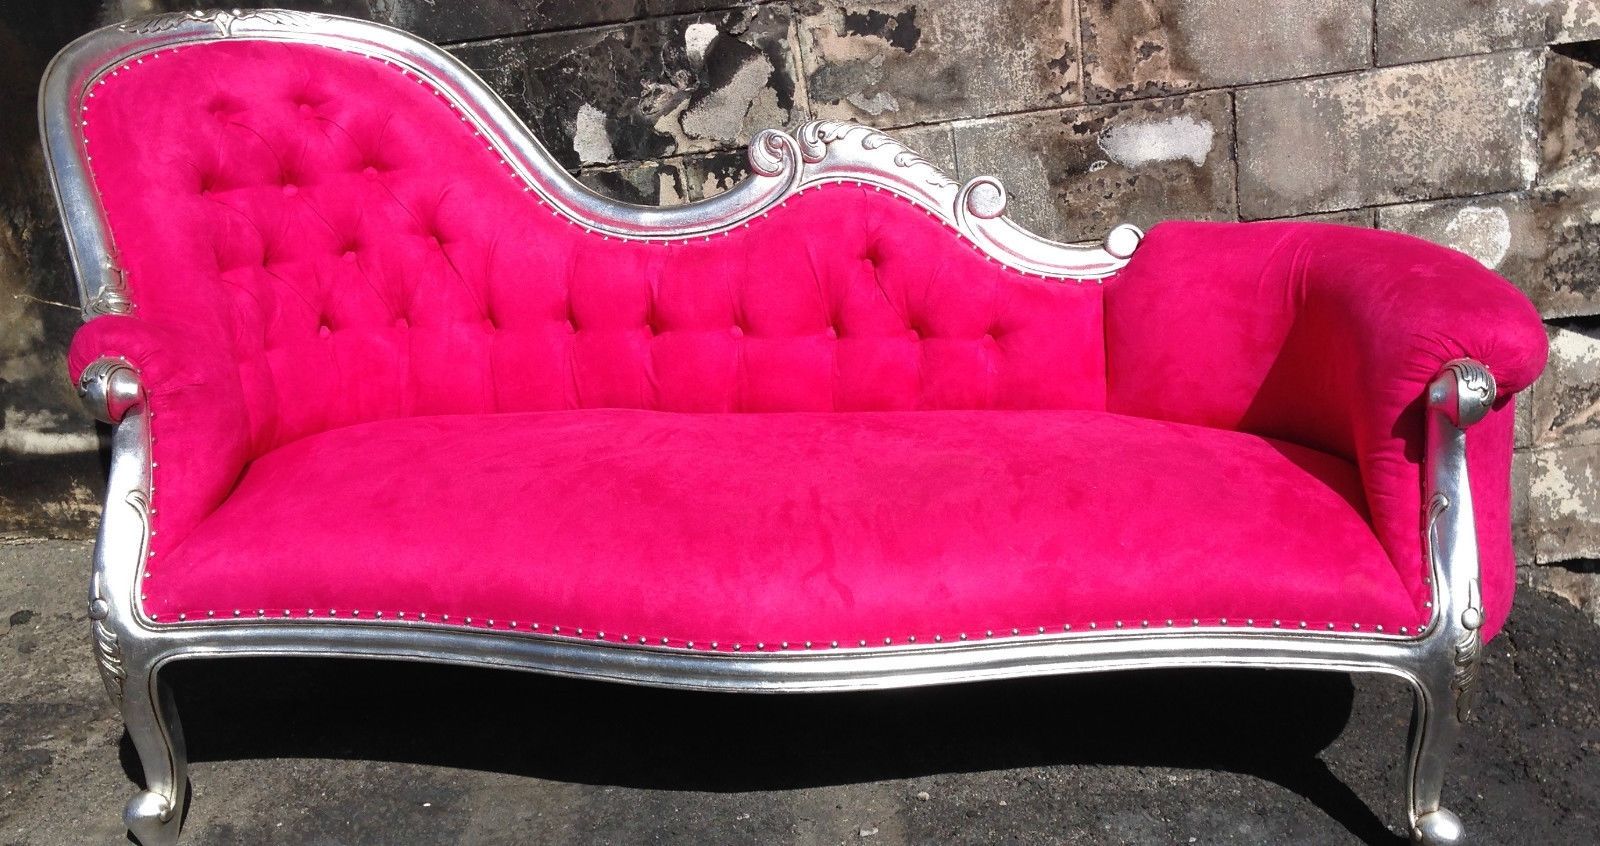 Rockstar Pink Chaise Lounge Chesterfield Sofa Queen Loveseat Couch Intended For Famous Hot Pink Chaise Lounge Chairs (View 1 of 15)